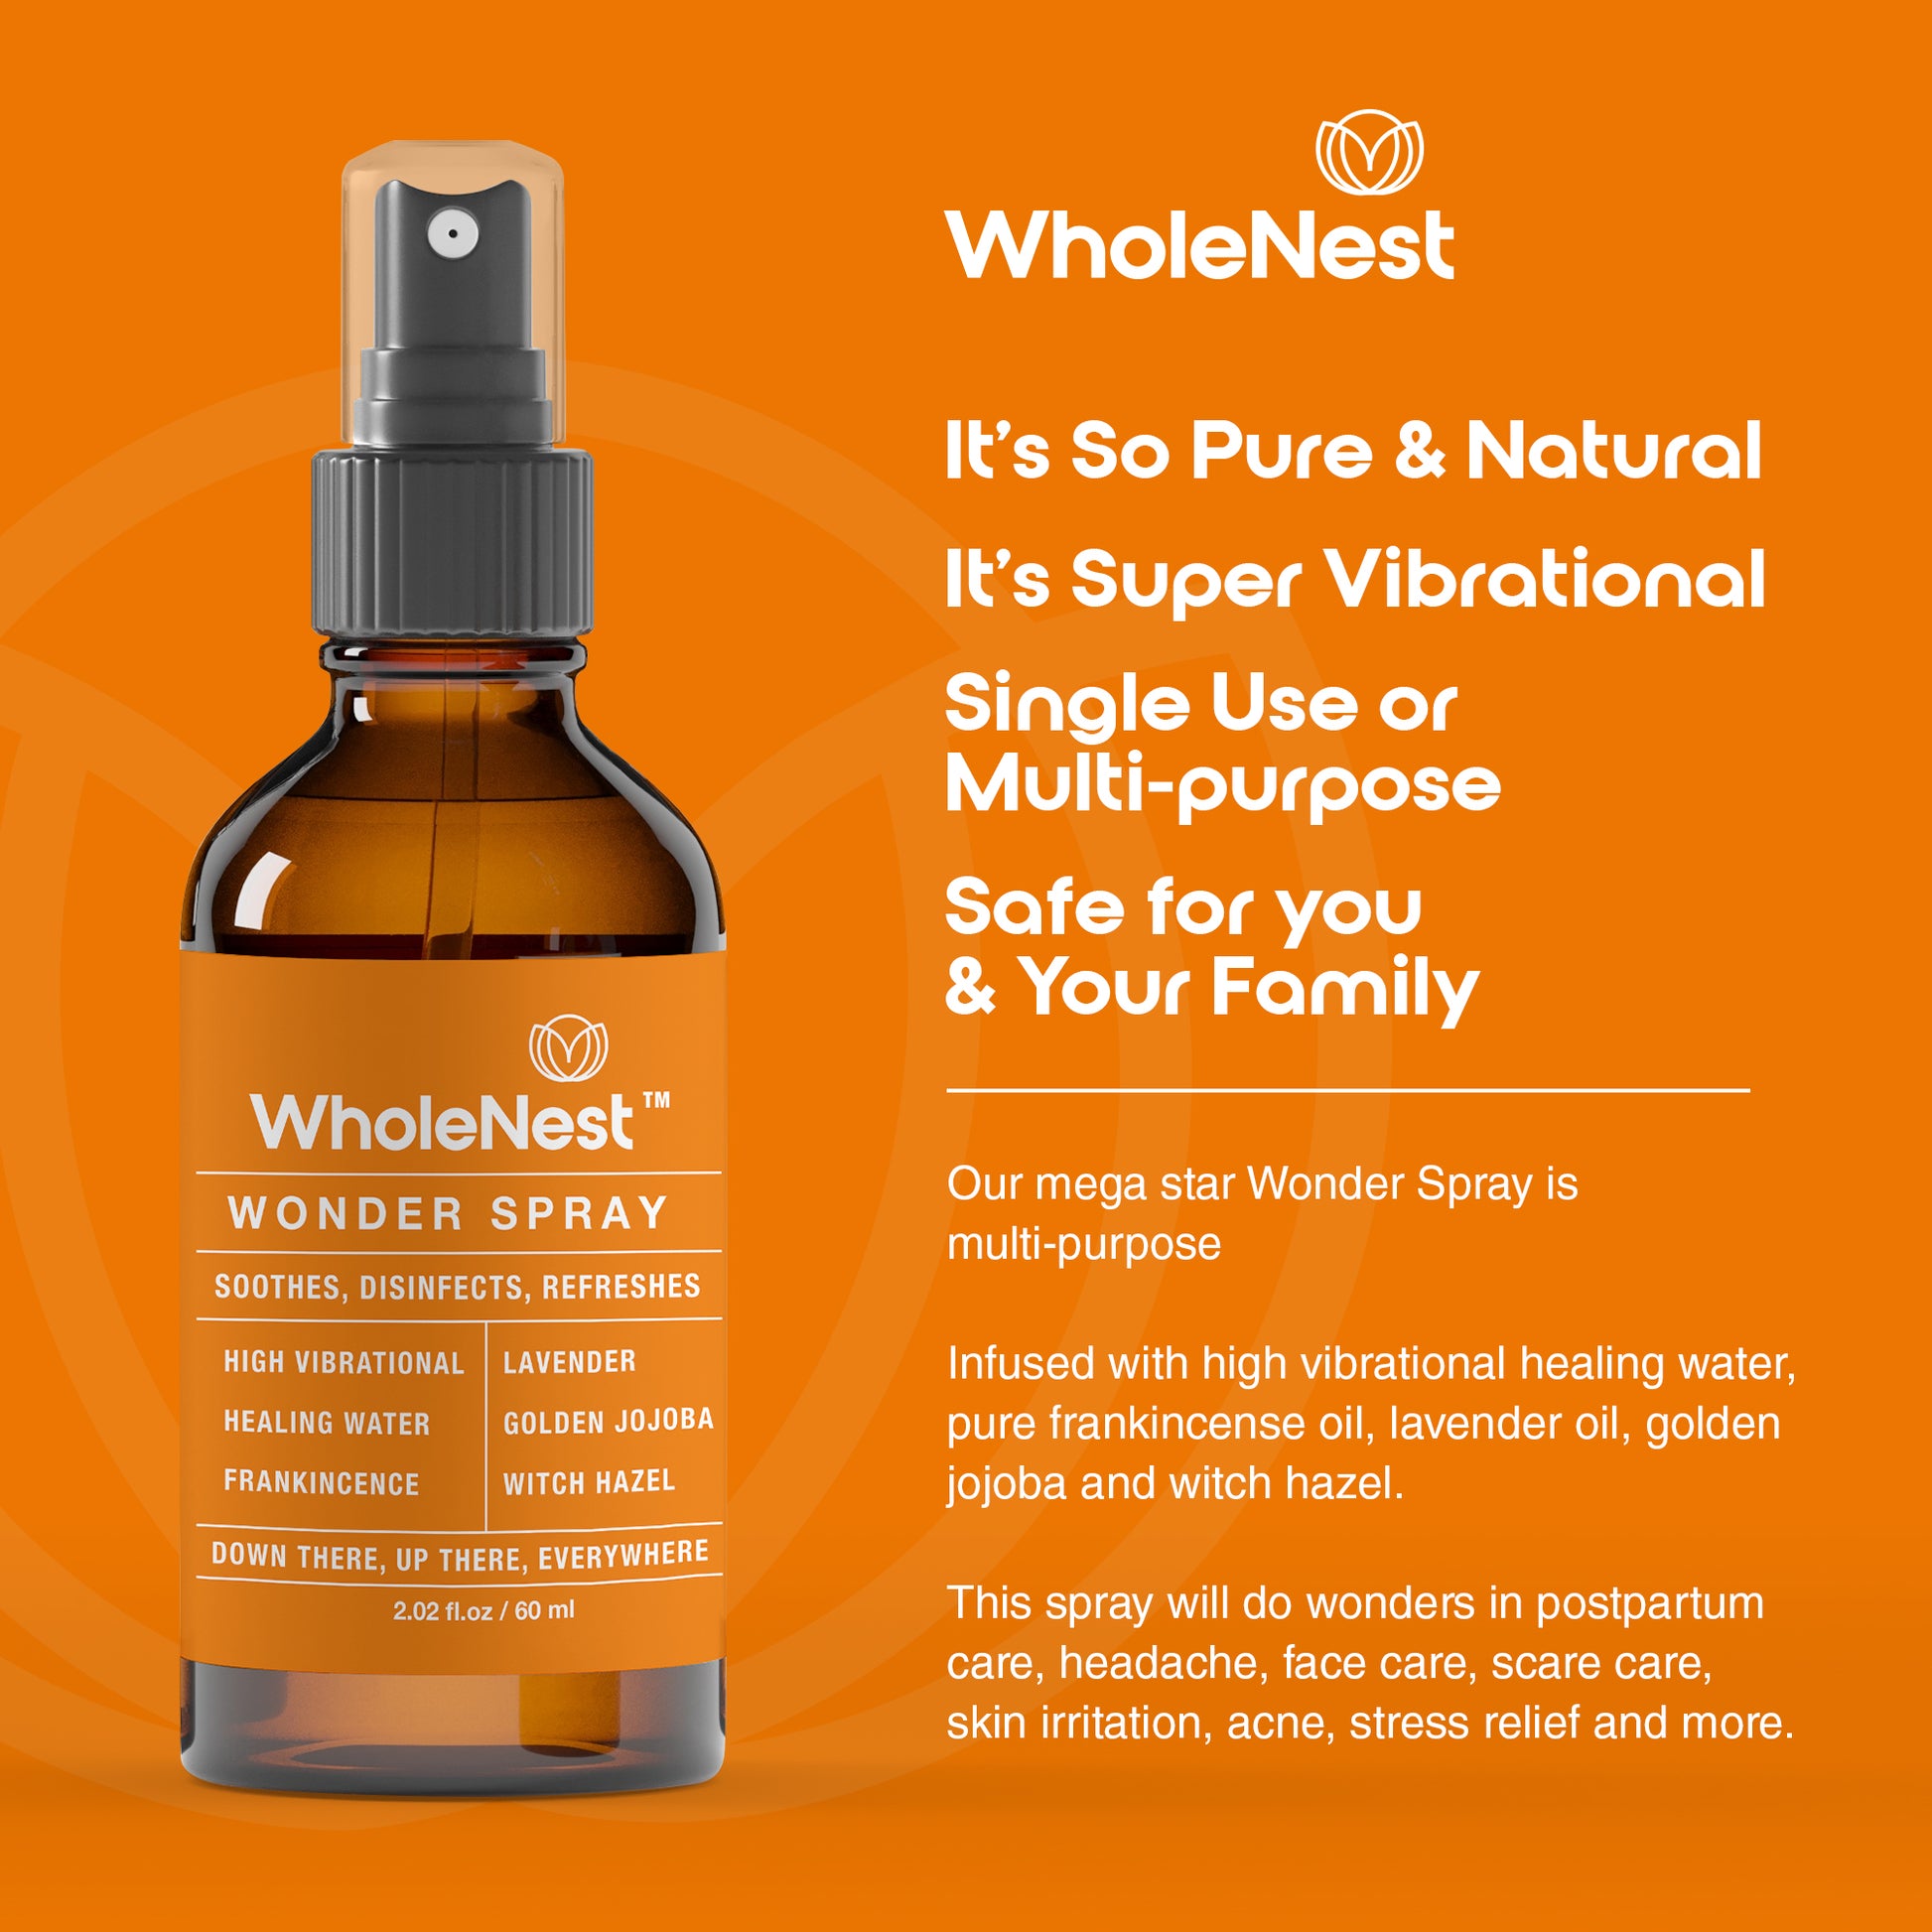 Wonder Spray is unique, powerful, and extremely healing for postpartum care - speeds up healing, reduces itch, swelling, and pain, soothes sore muscles, and gives good hygiene to the perineal area. 